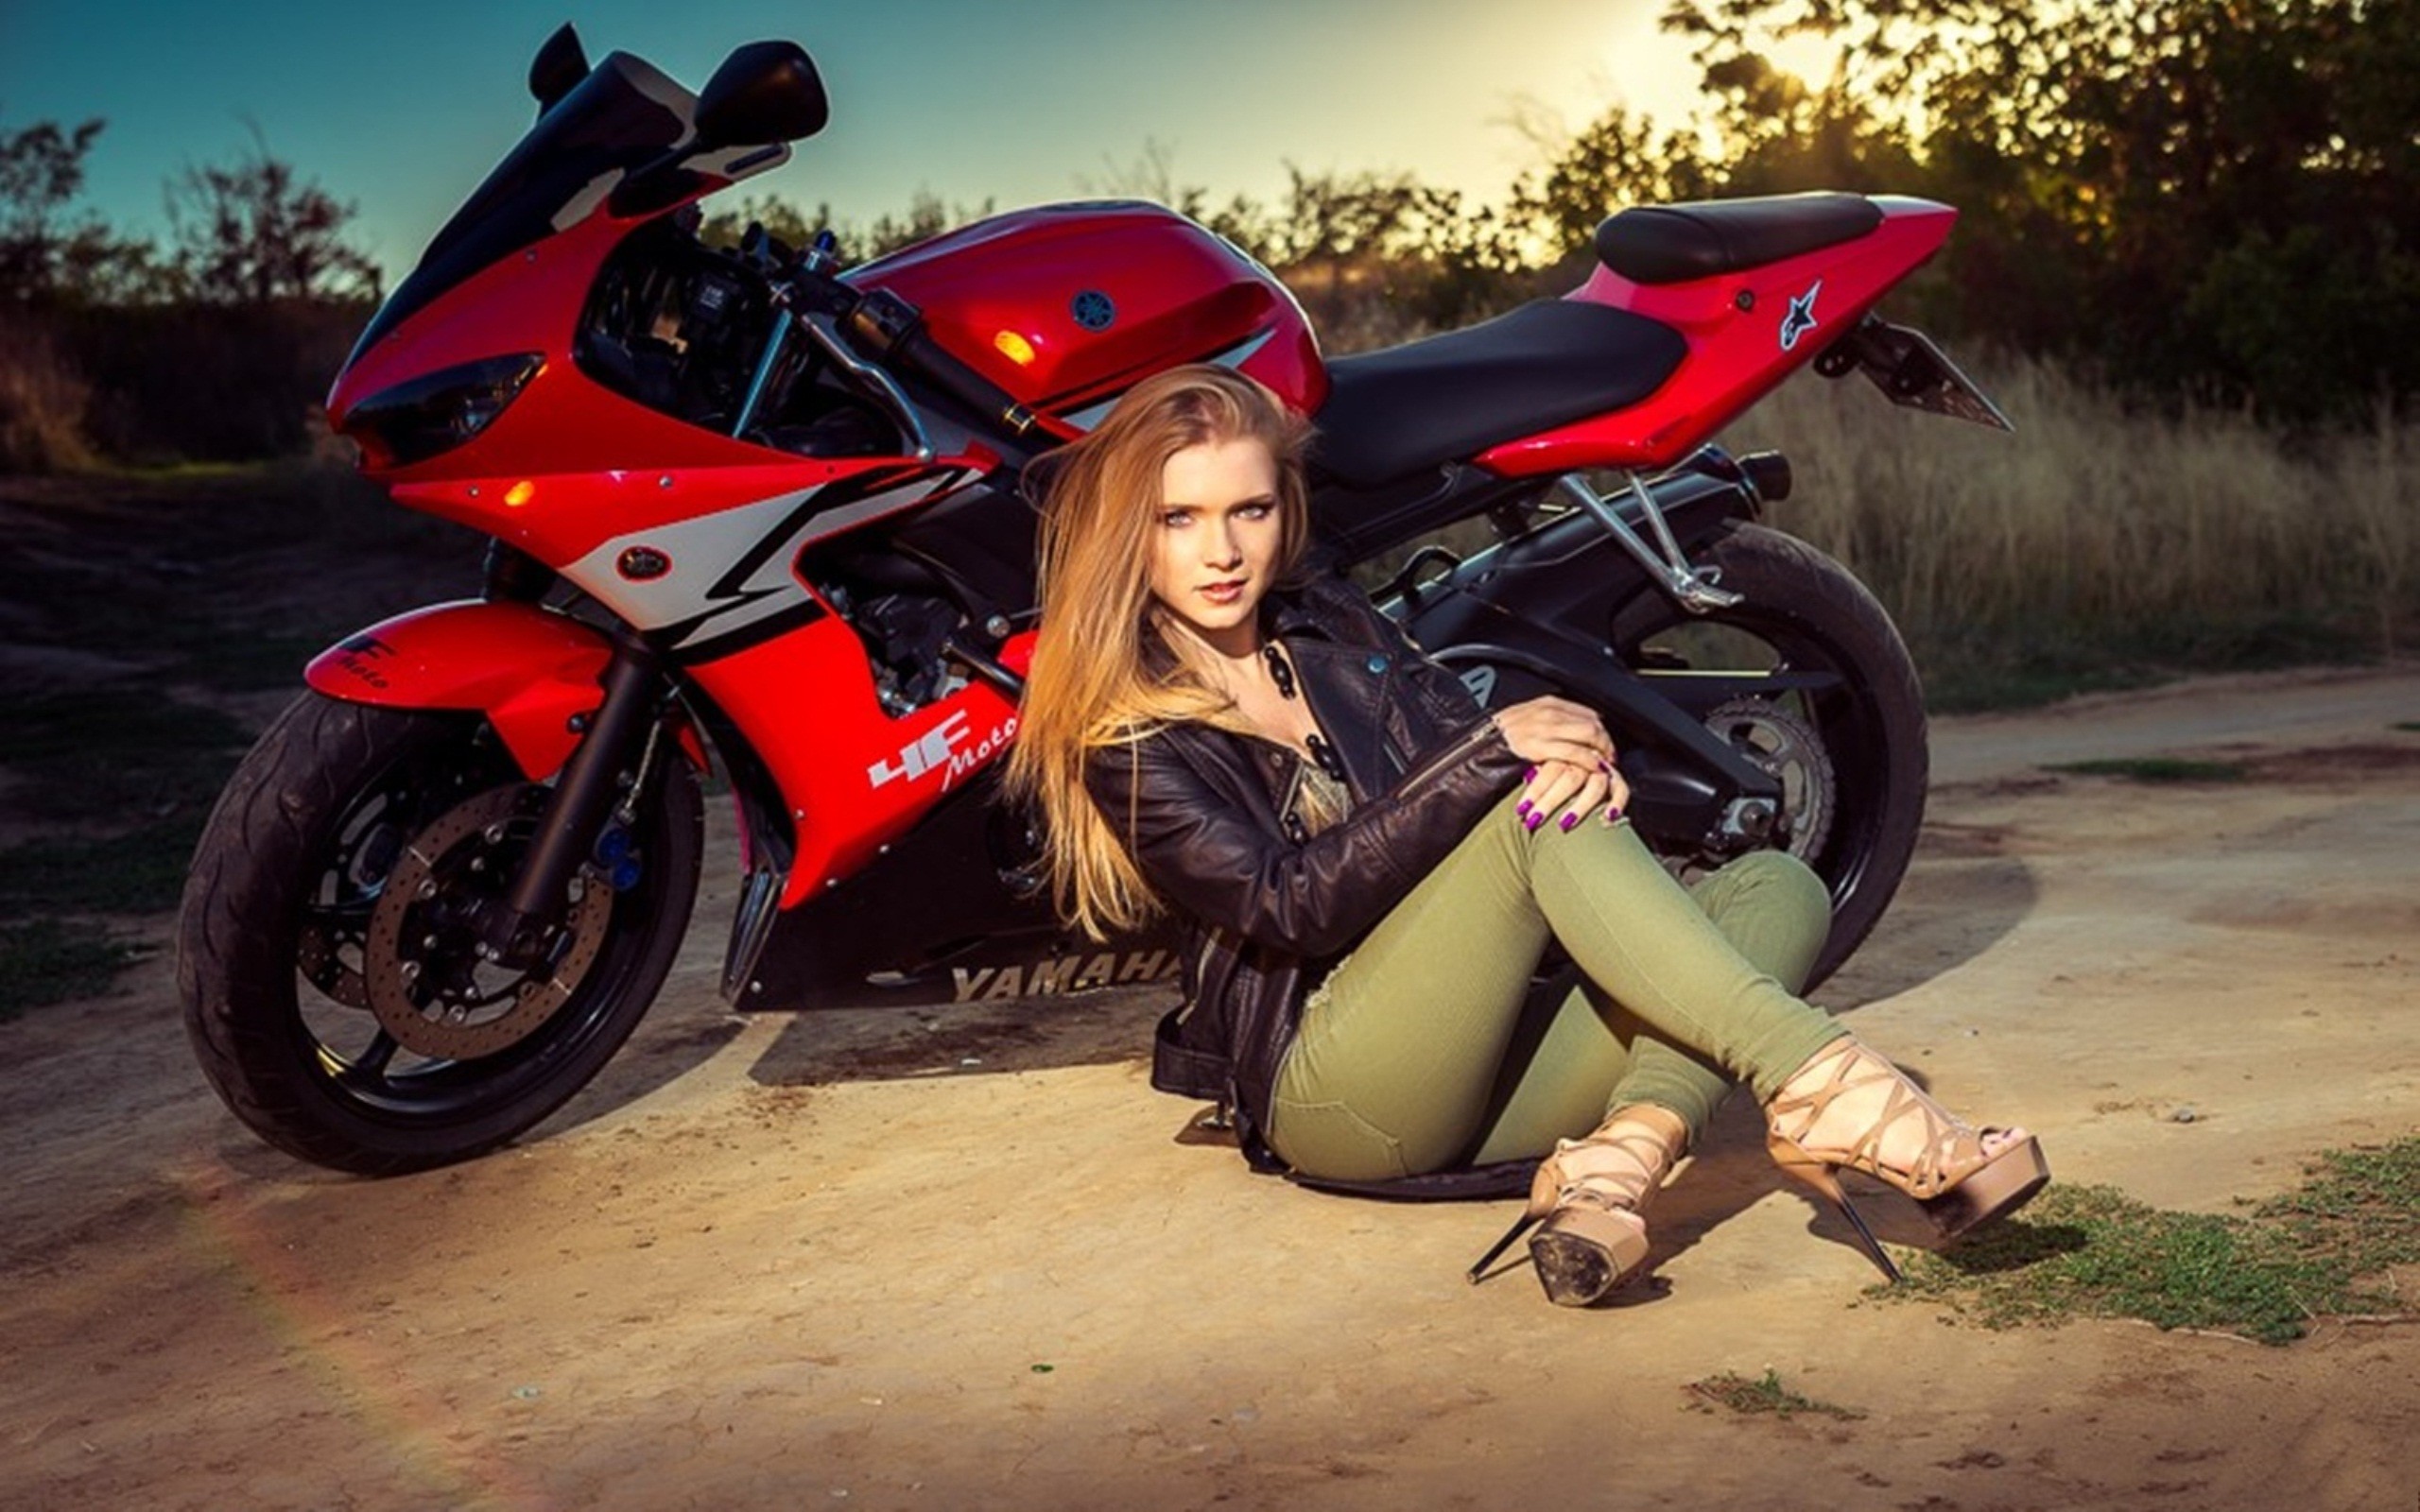 Hd Wallpapers Motorcycles And Girls 70 Images 34965 Hot Sex Picture 3885